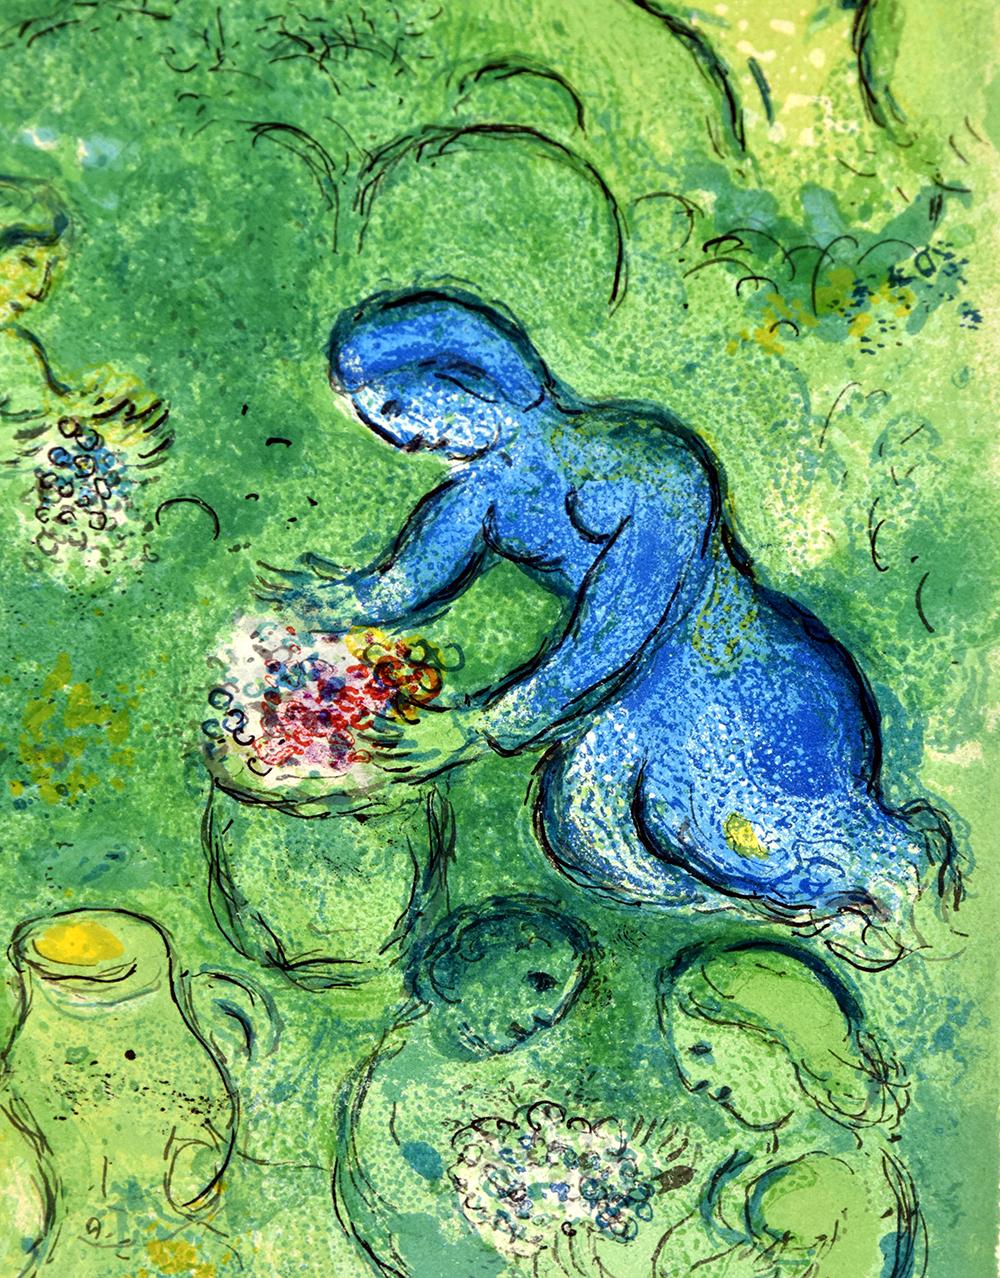 Les Vendanges (The Wine Harvest), from Daphnis et Chloé - Green Figurative Print by Marc Chagall